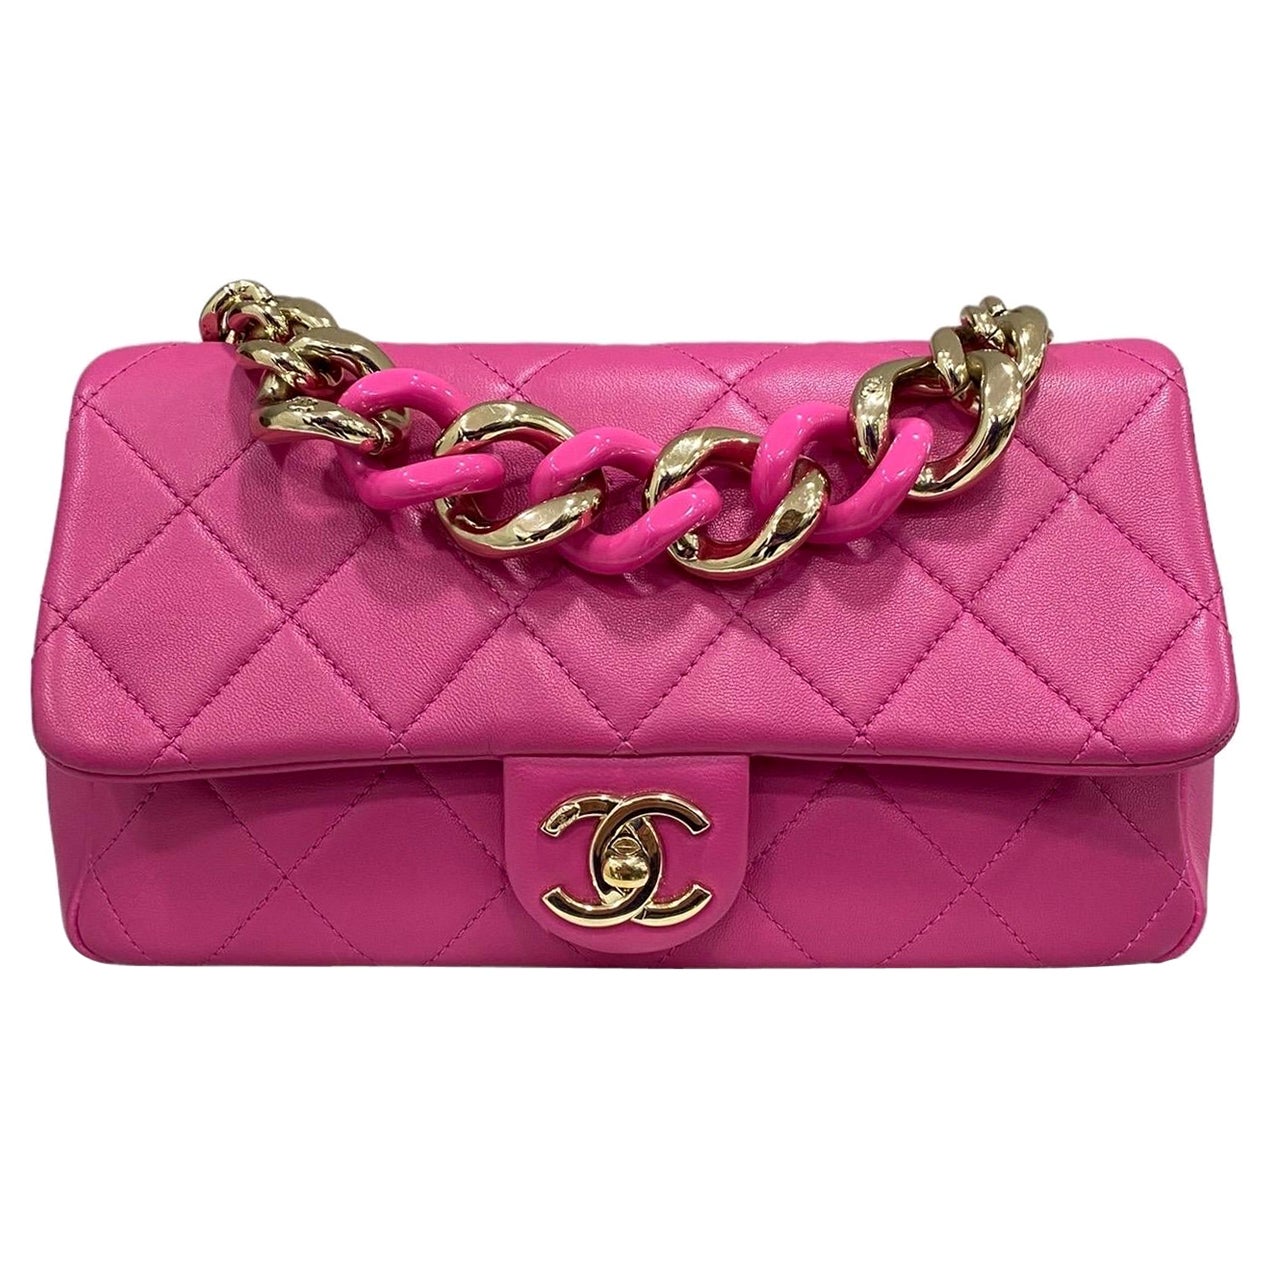 Chanel 19 Pink - 189 For Sale on 1stDibs  chanel 19 neon pink, chanel 19  hot pink, chanel 19 pink bag